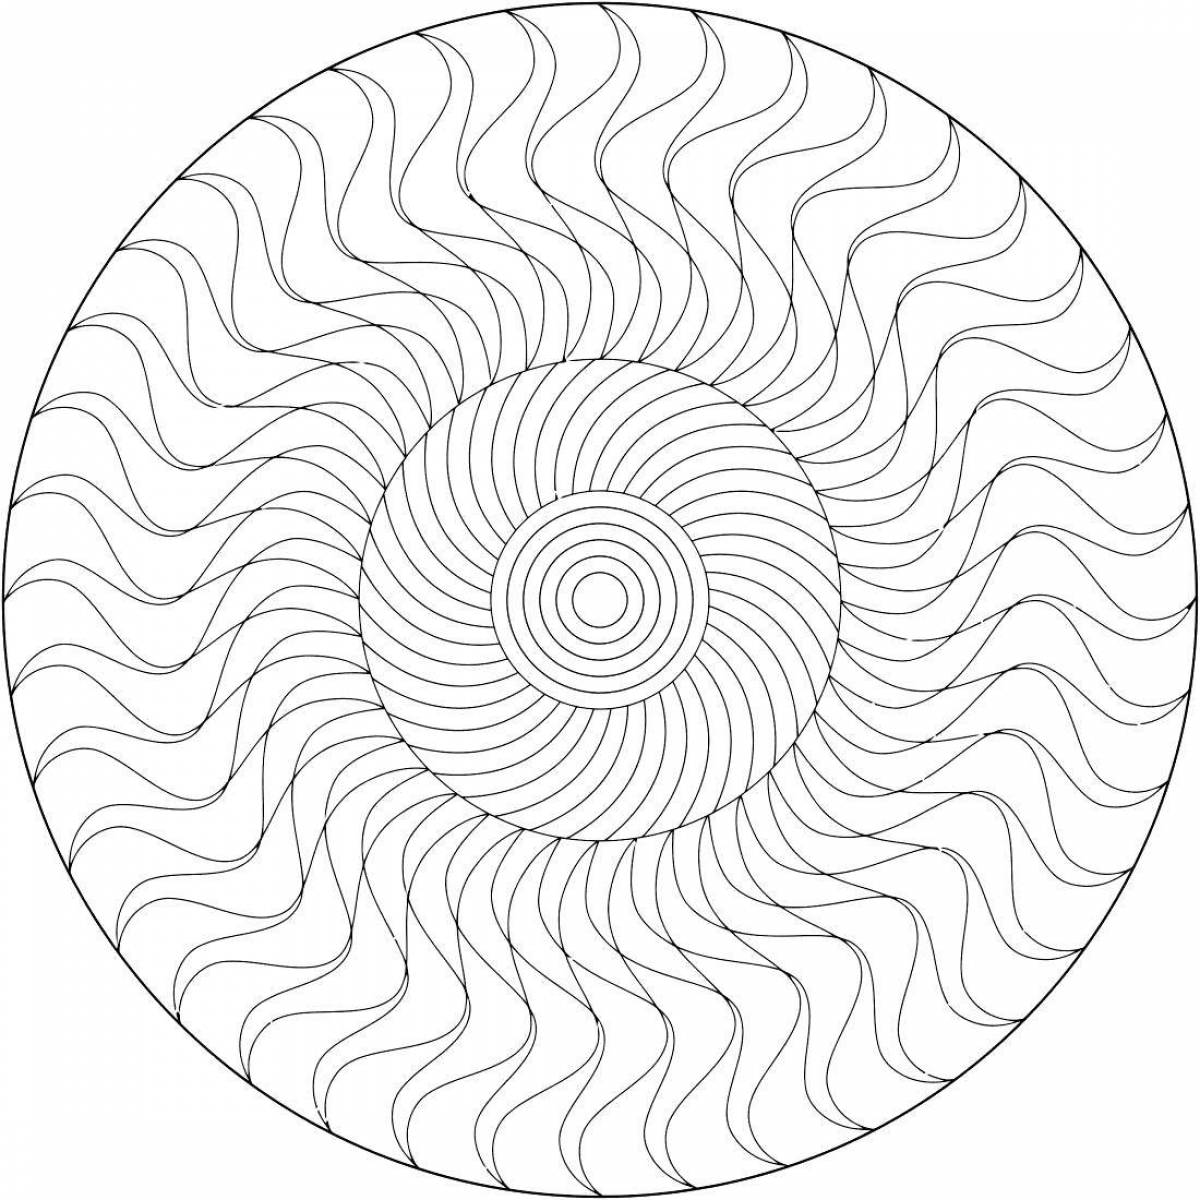 Hypnotic spiral coloring page